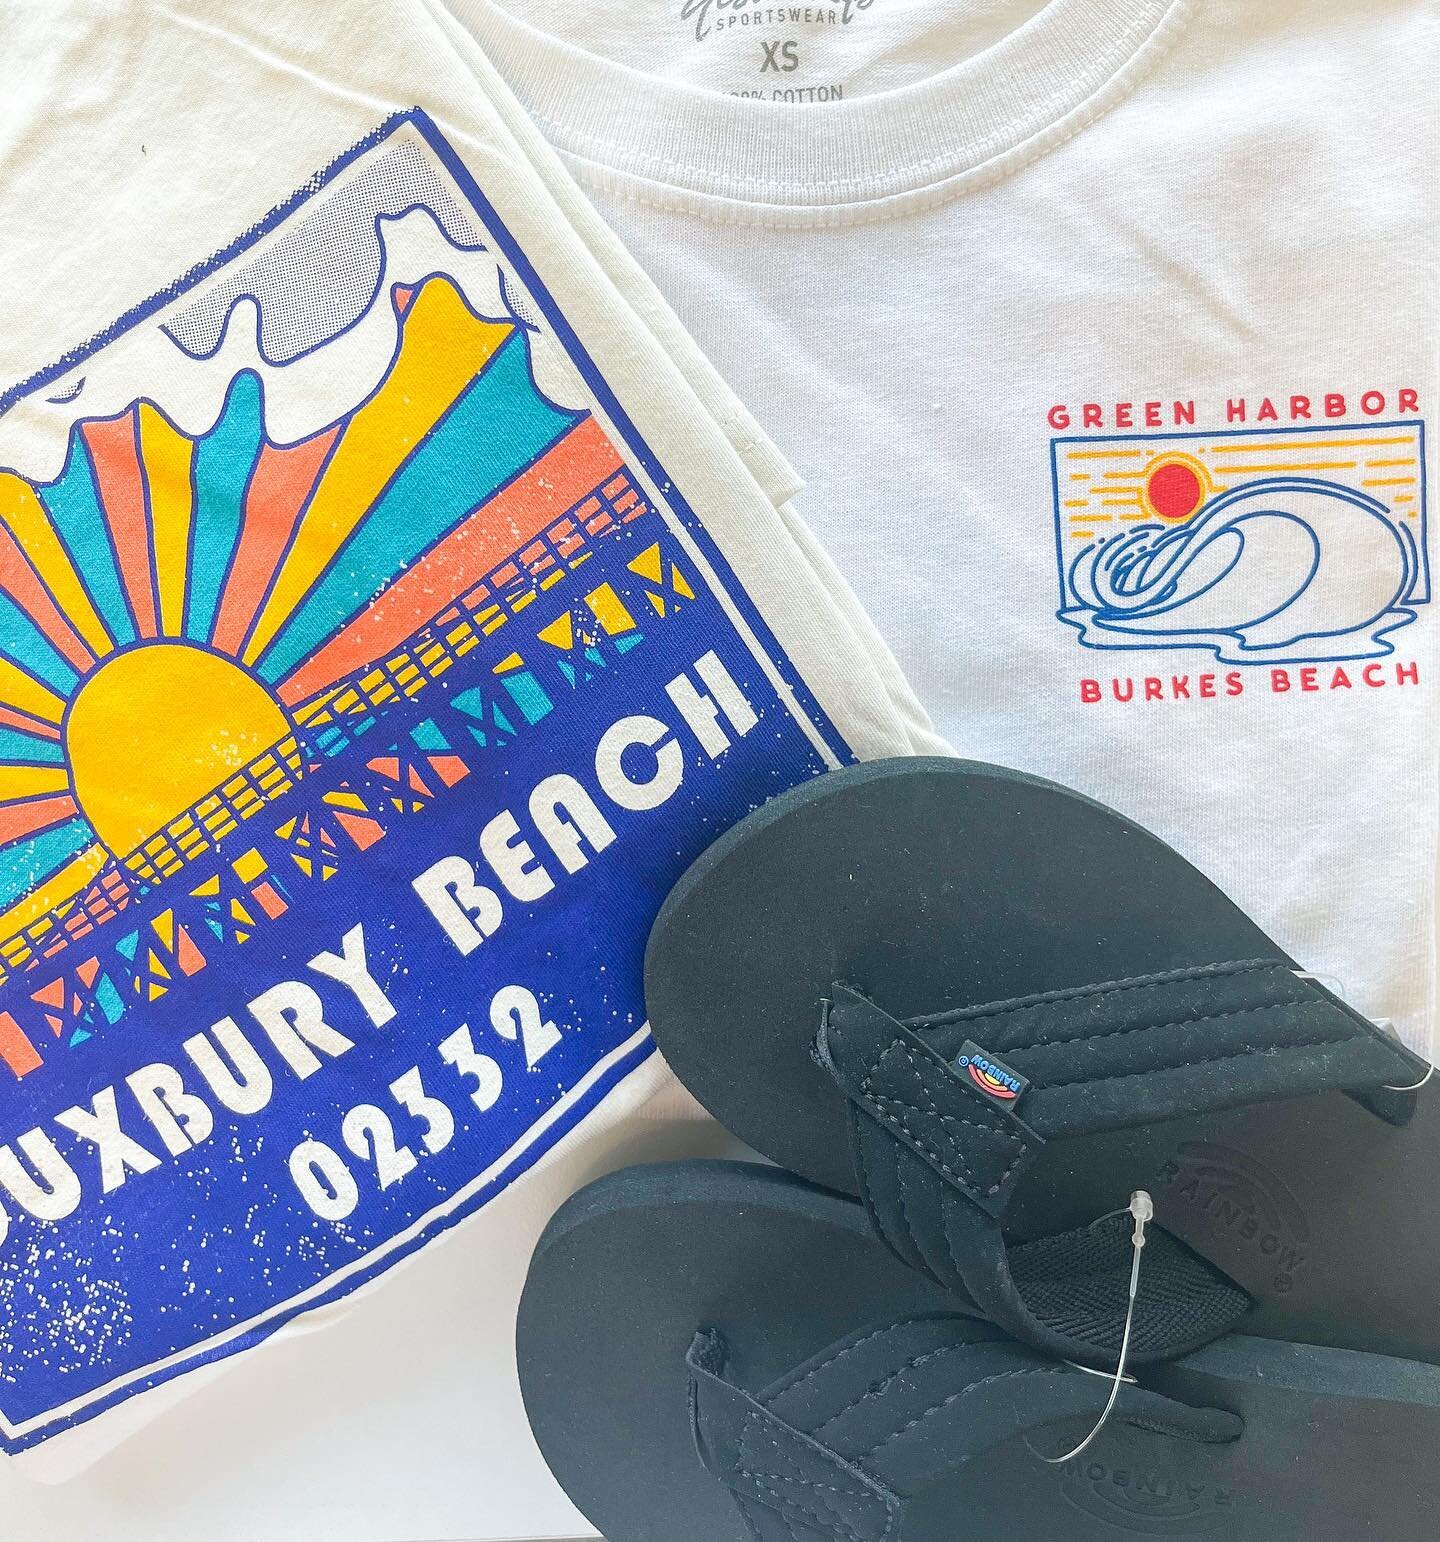 Calling all Kiddos 🚨 We want your help designing our next round of beach gear. We are looking for 2 designs one for Duxbury and one for Marshfield. To enter please draw a picture of what you think would make for a great design and bring it by the sh